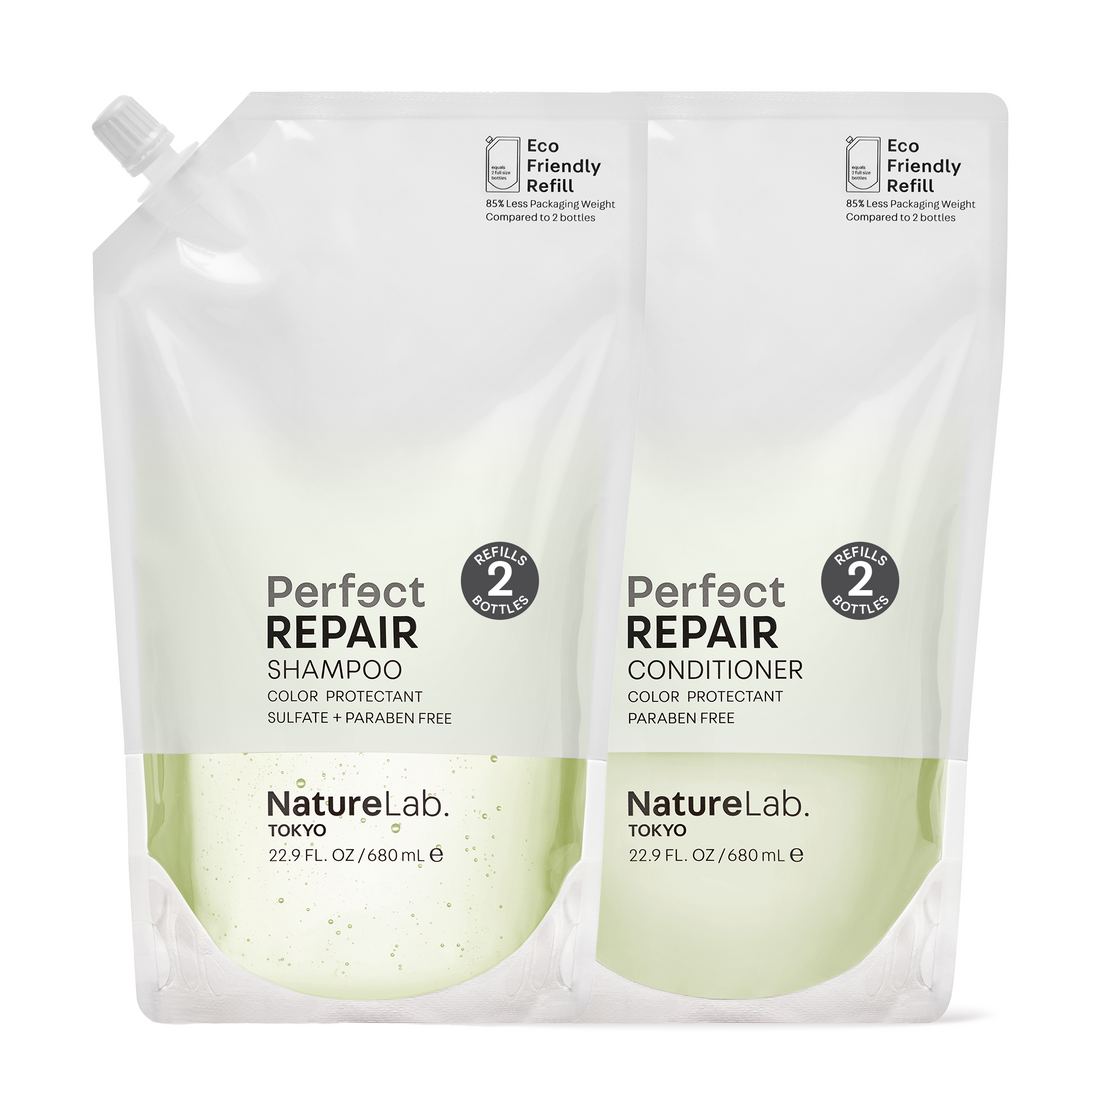 Repair Shampoo & Conditioner Refill on white background.